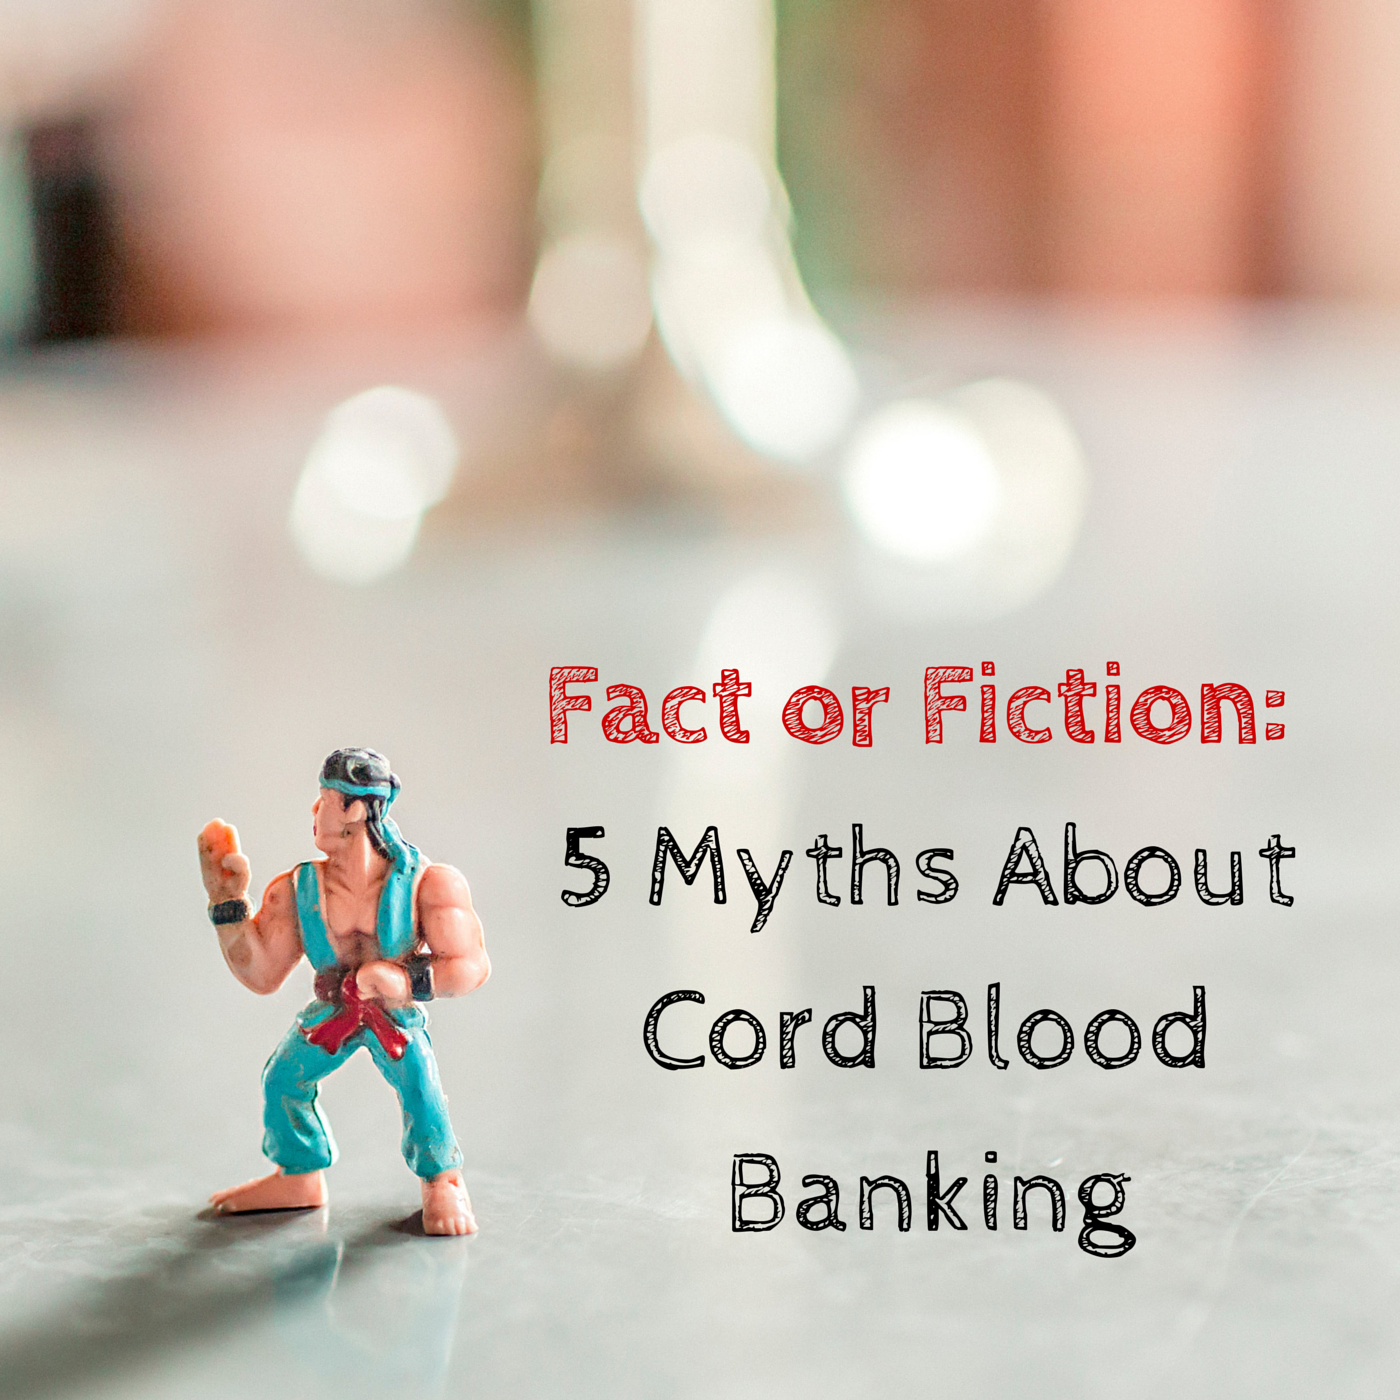 5 Myths About Cord Blood Banking